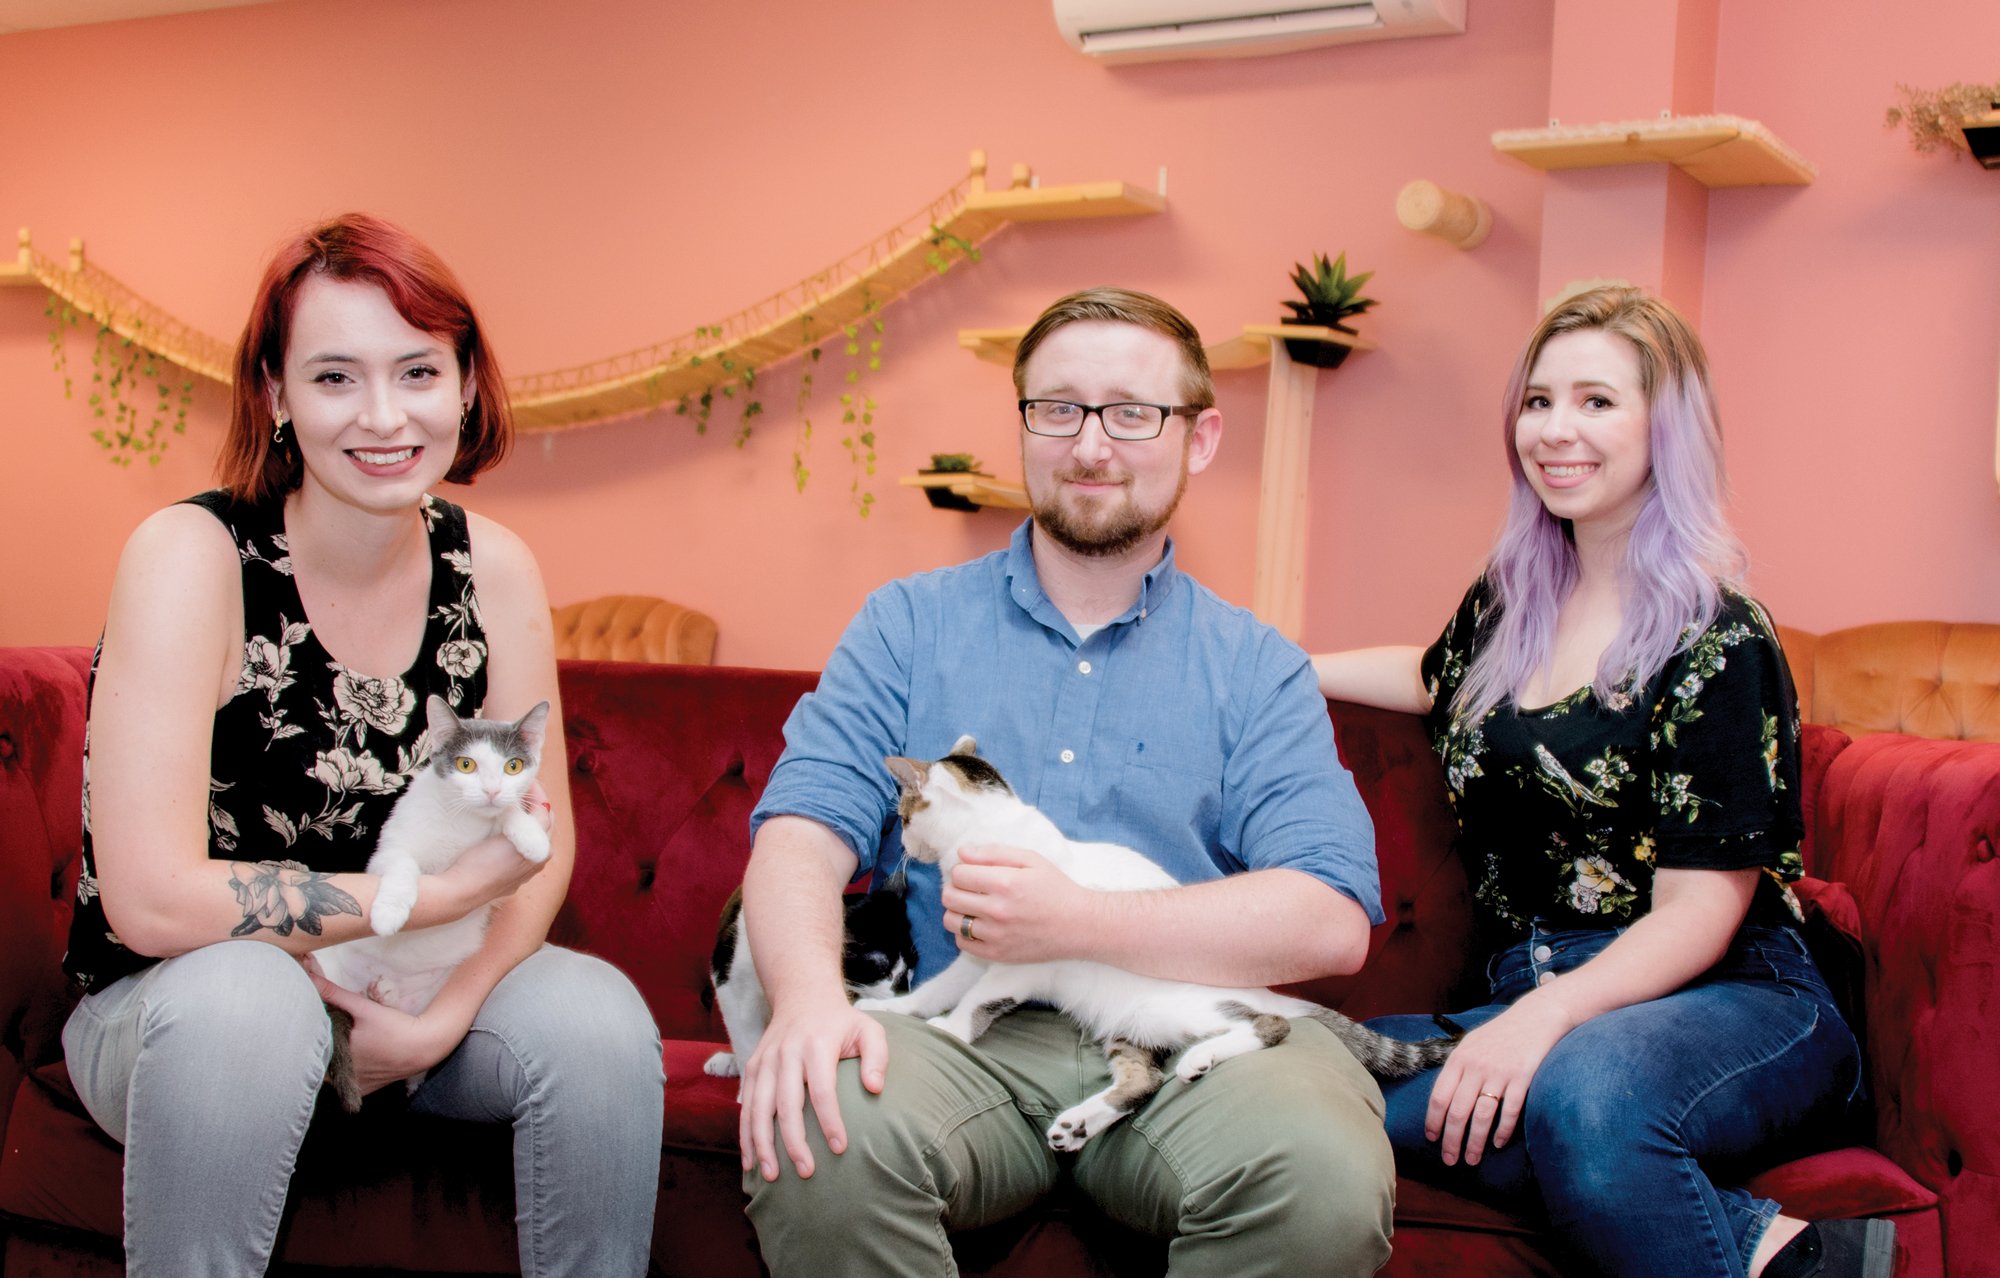  Tally  Cat  Caf  is The Purrfect Business Venture 